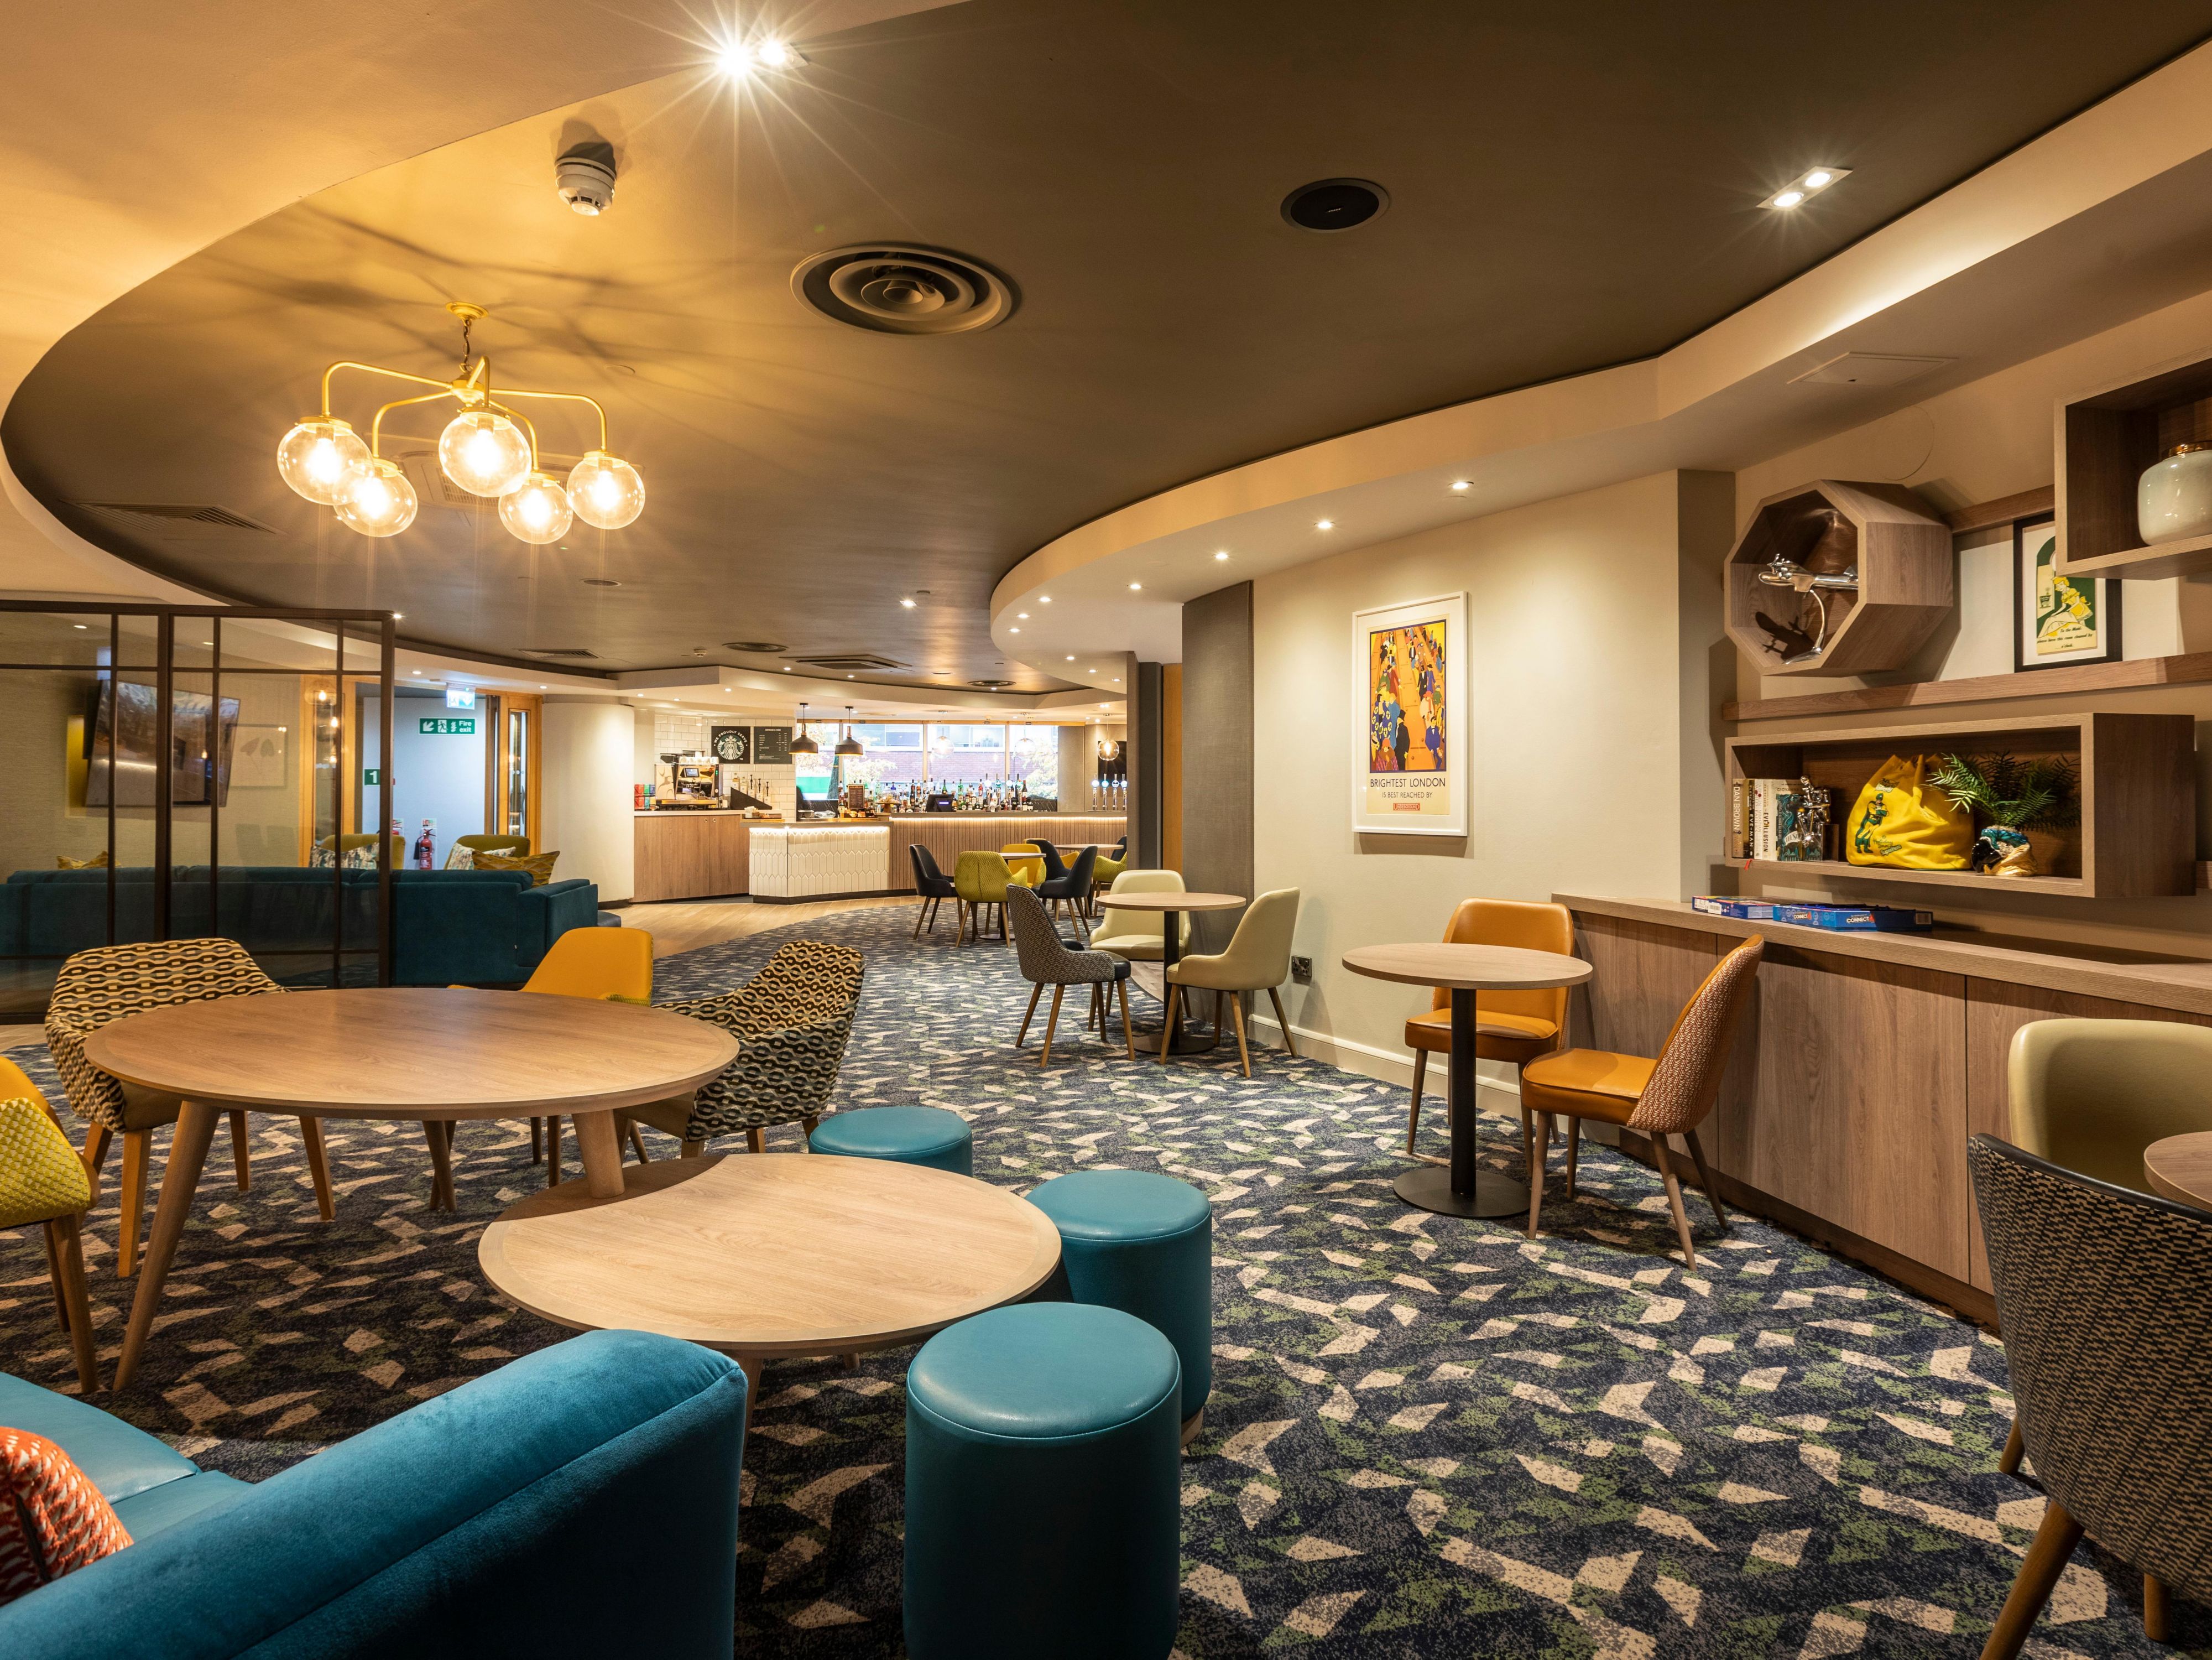 Just click on the link for a chance to visit Holiday Inn London Regent's Park virtually with a fully interactive, virtual tour. Move through the hotel exploring the lounge, bar, restaurant, meeting and event spaces, and bedrooms.